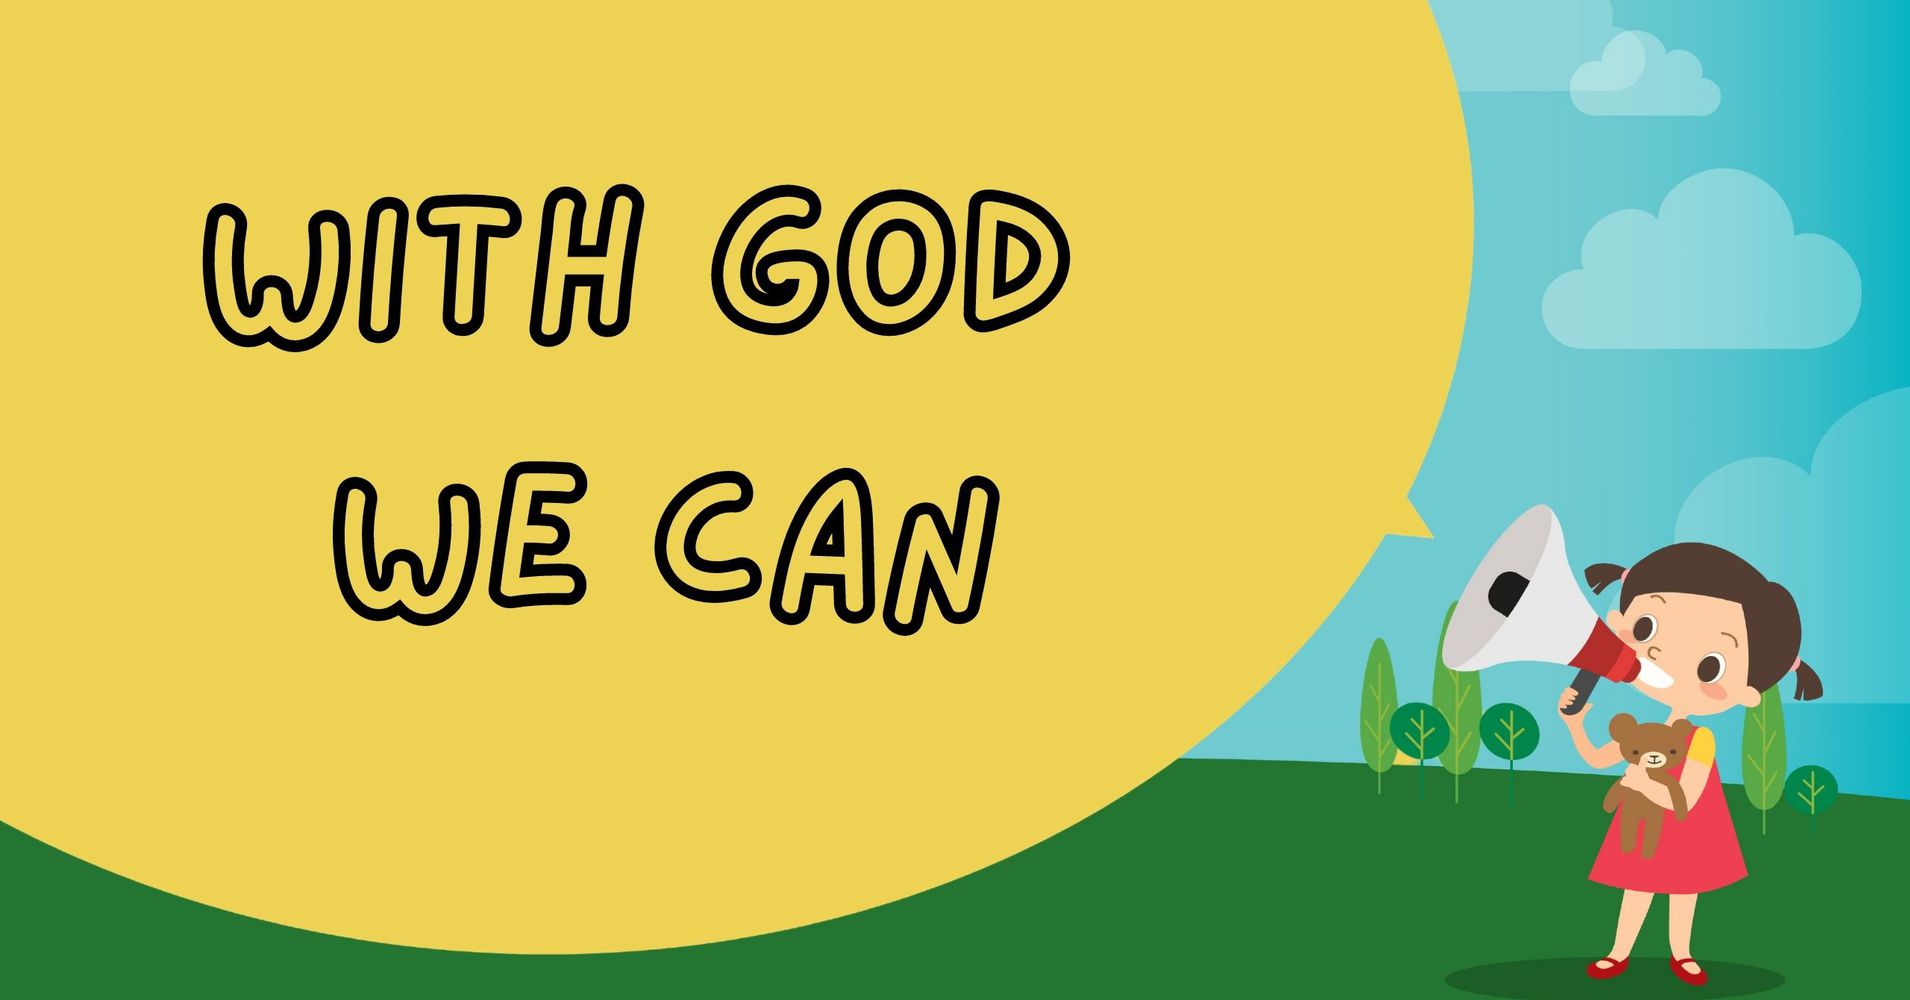 Featured image for “With God We Can”